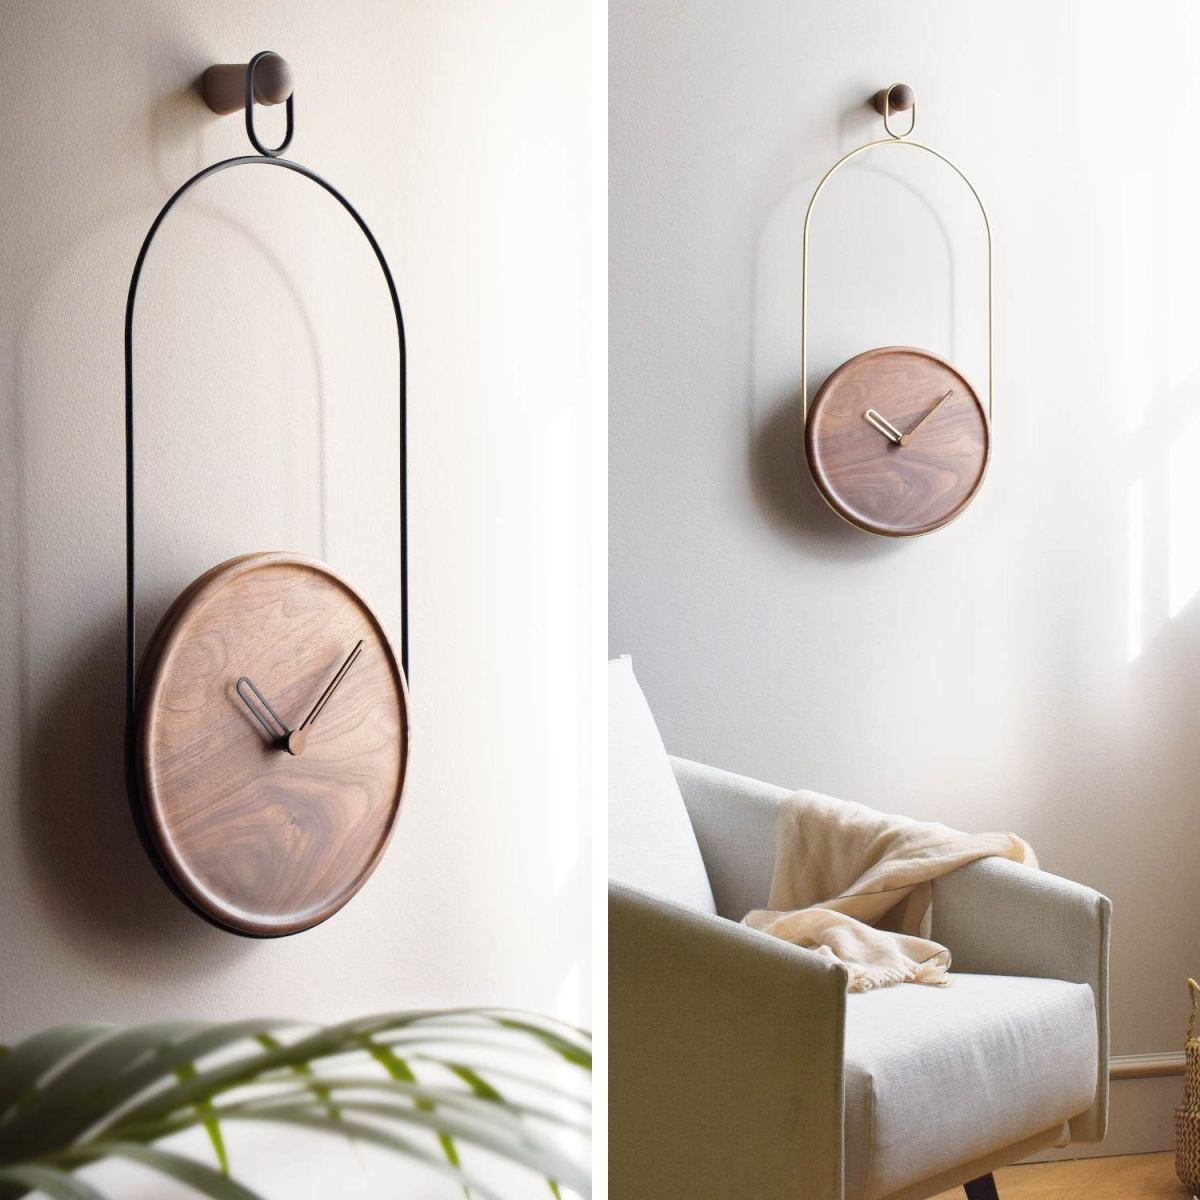 Suspended wall clock made of walnut wood